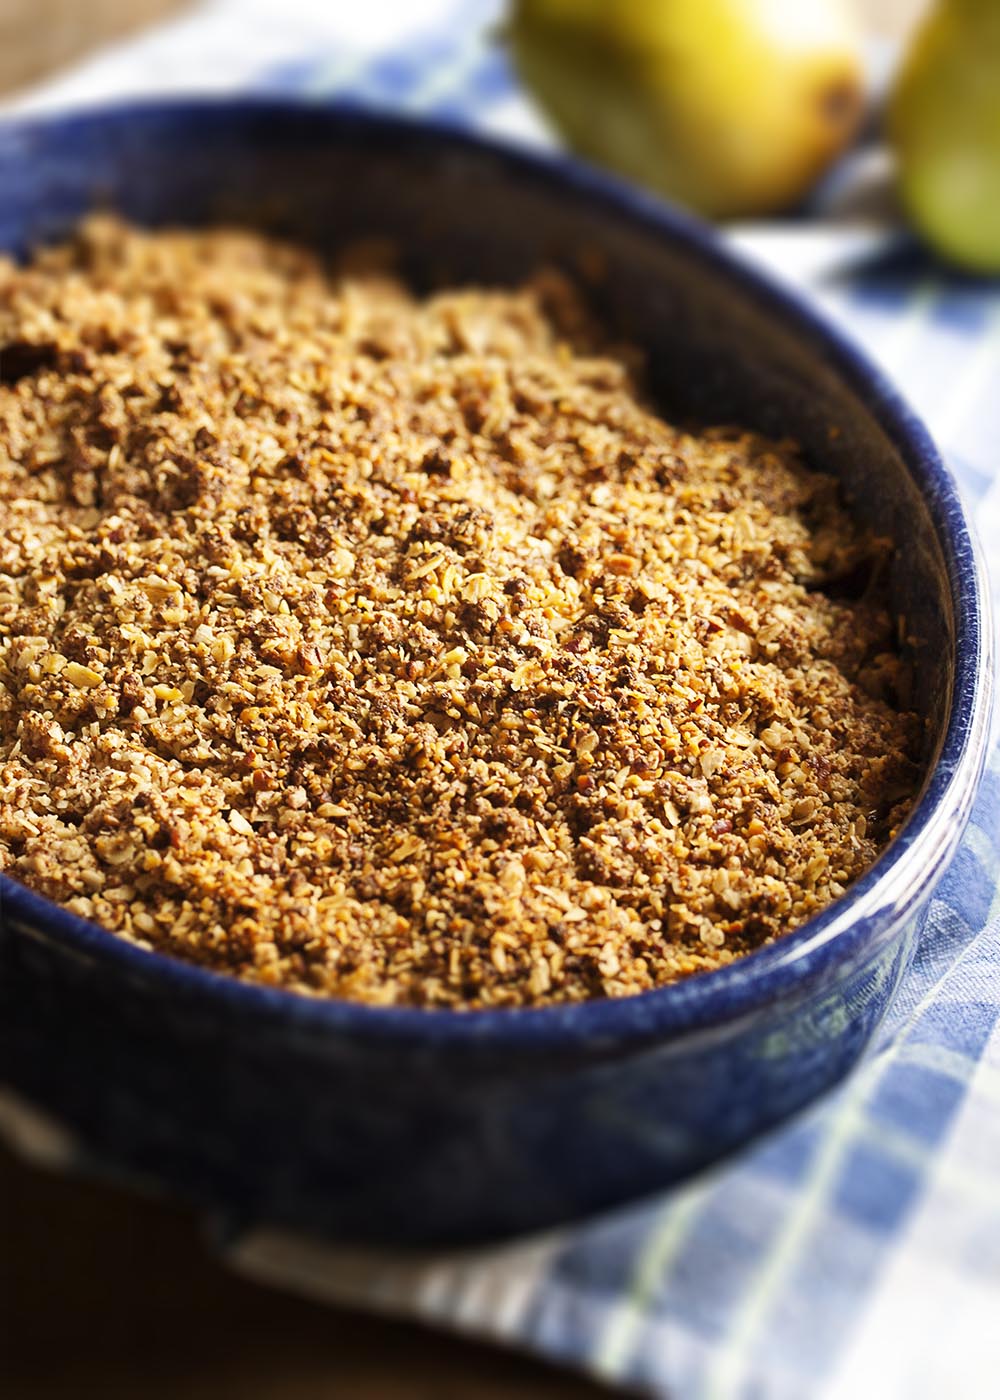 Gluten-Free Pear Ginger Crumble - Ripe pears and freshly grated ginger are topped with a nut and oat streusel in this lightly sweetened, gluten-free crumble. With no peeling necessary since the pears are sliced so thin! | justalittlebitofbacon.com